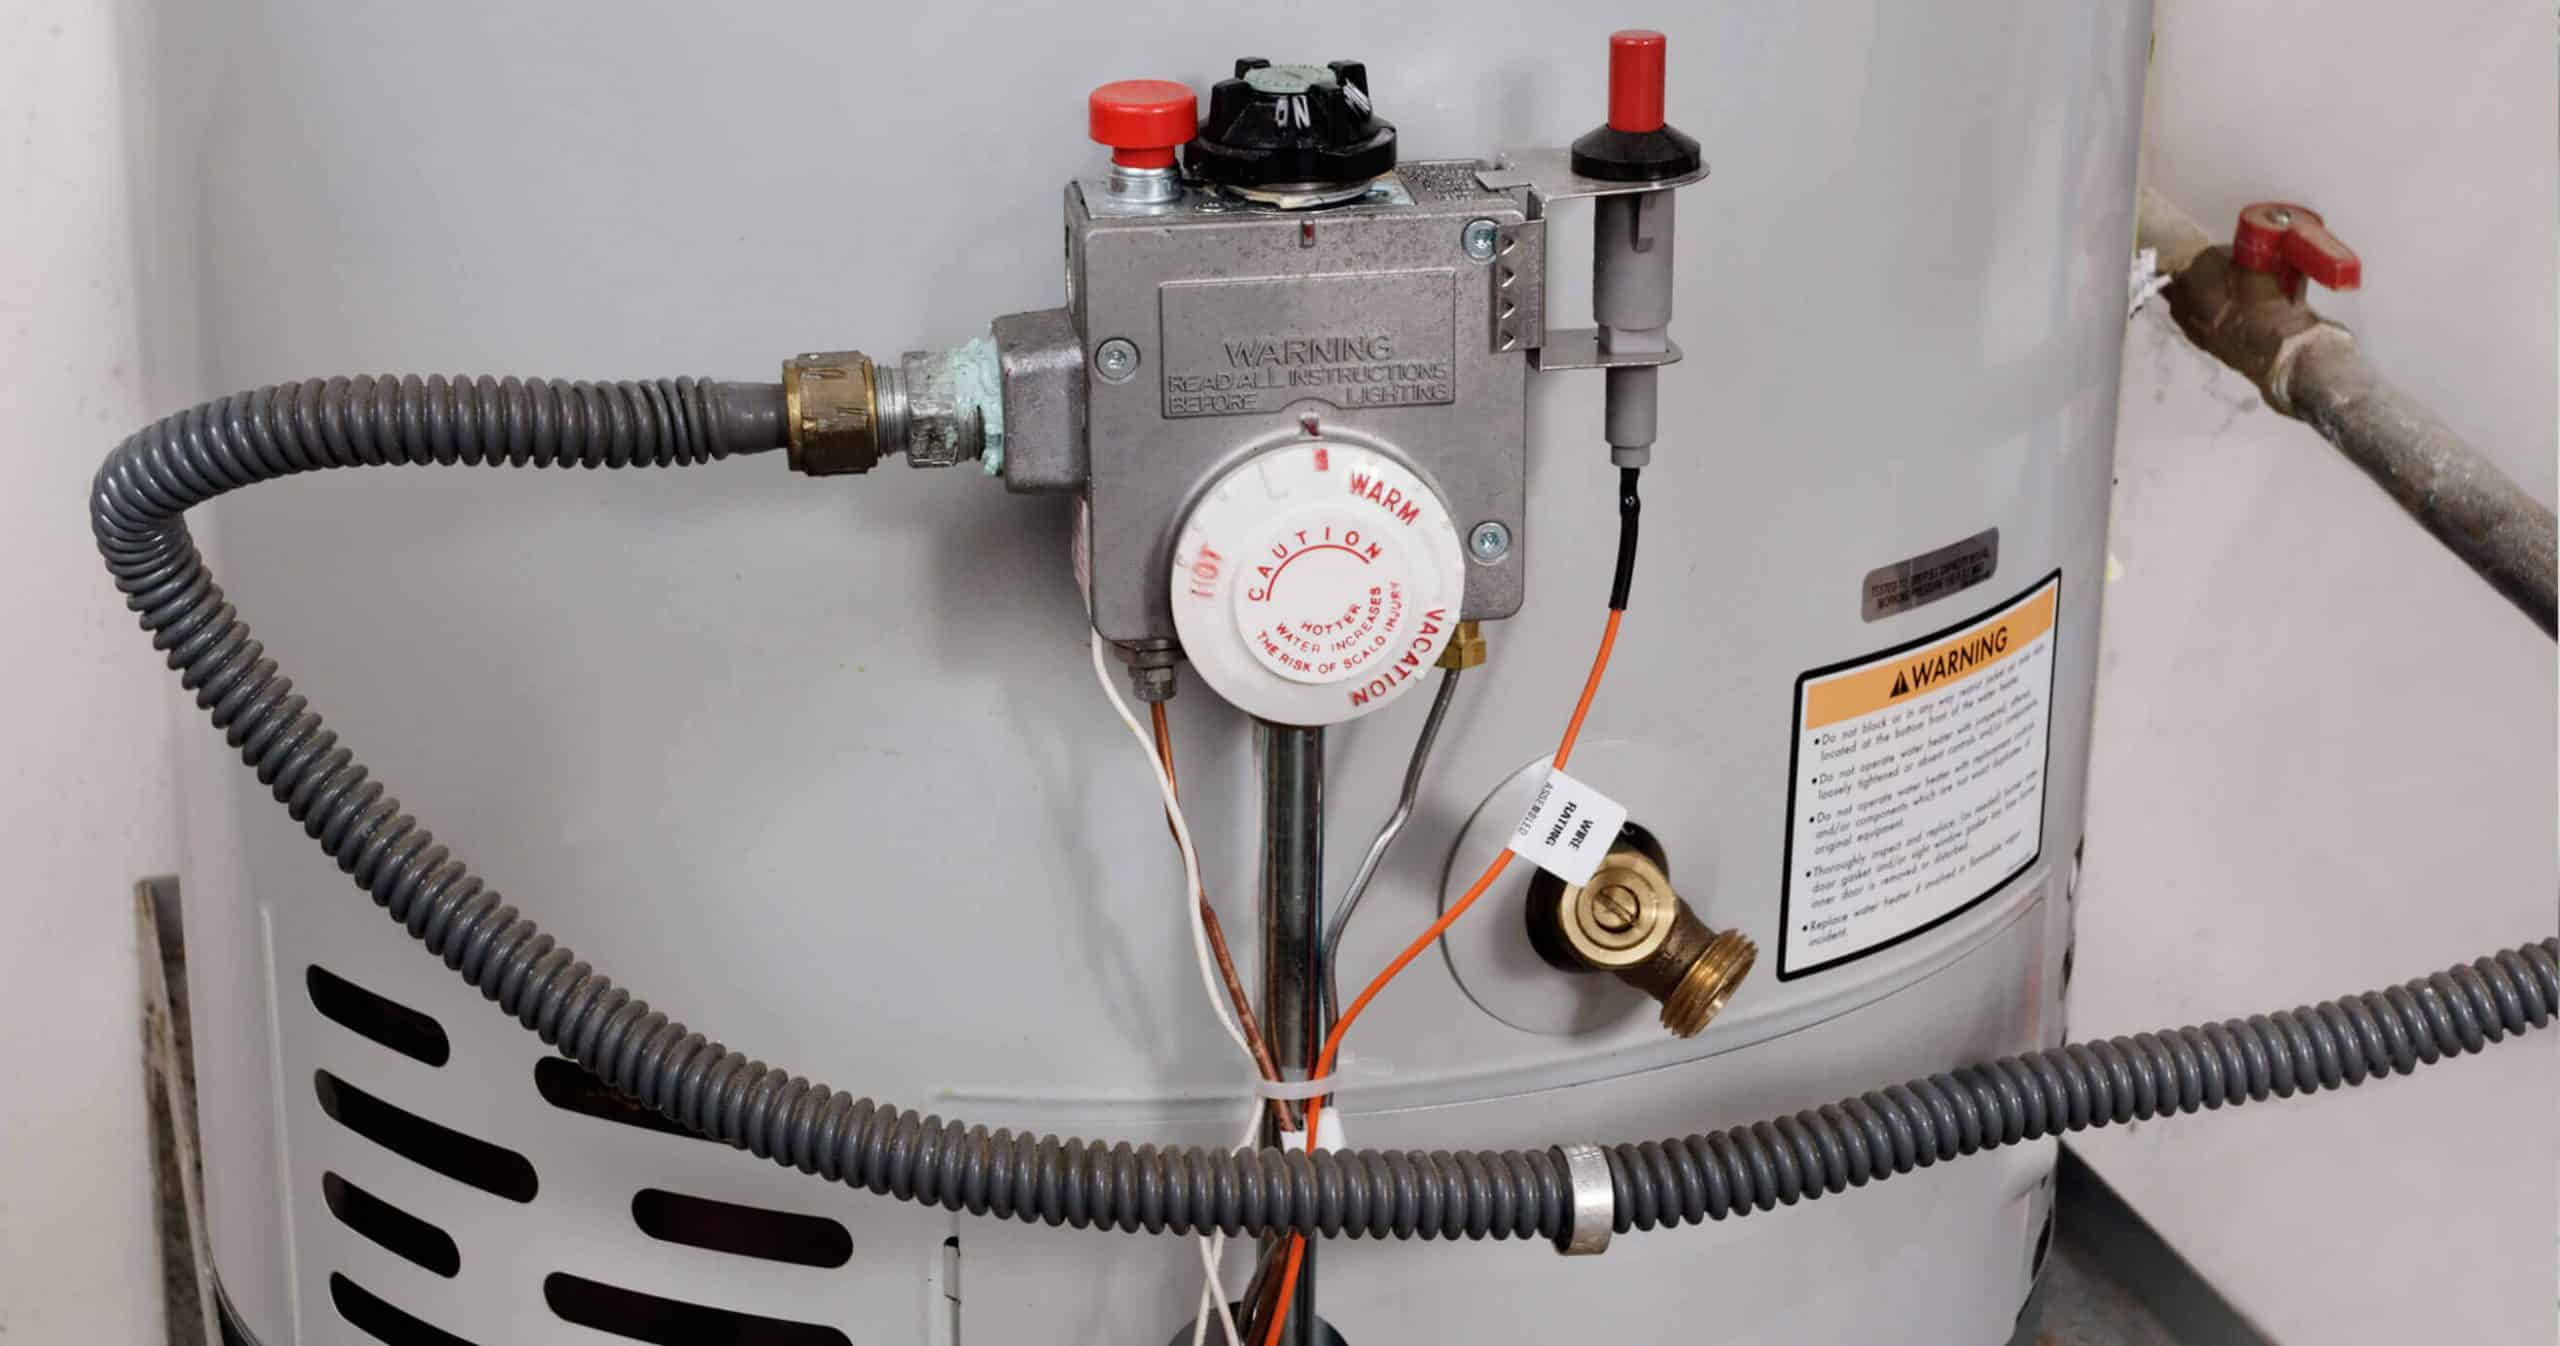 What causes too much pressure in a hot water heater?